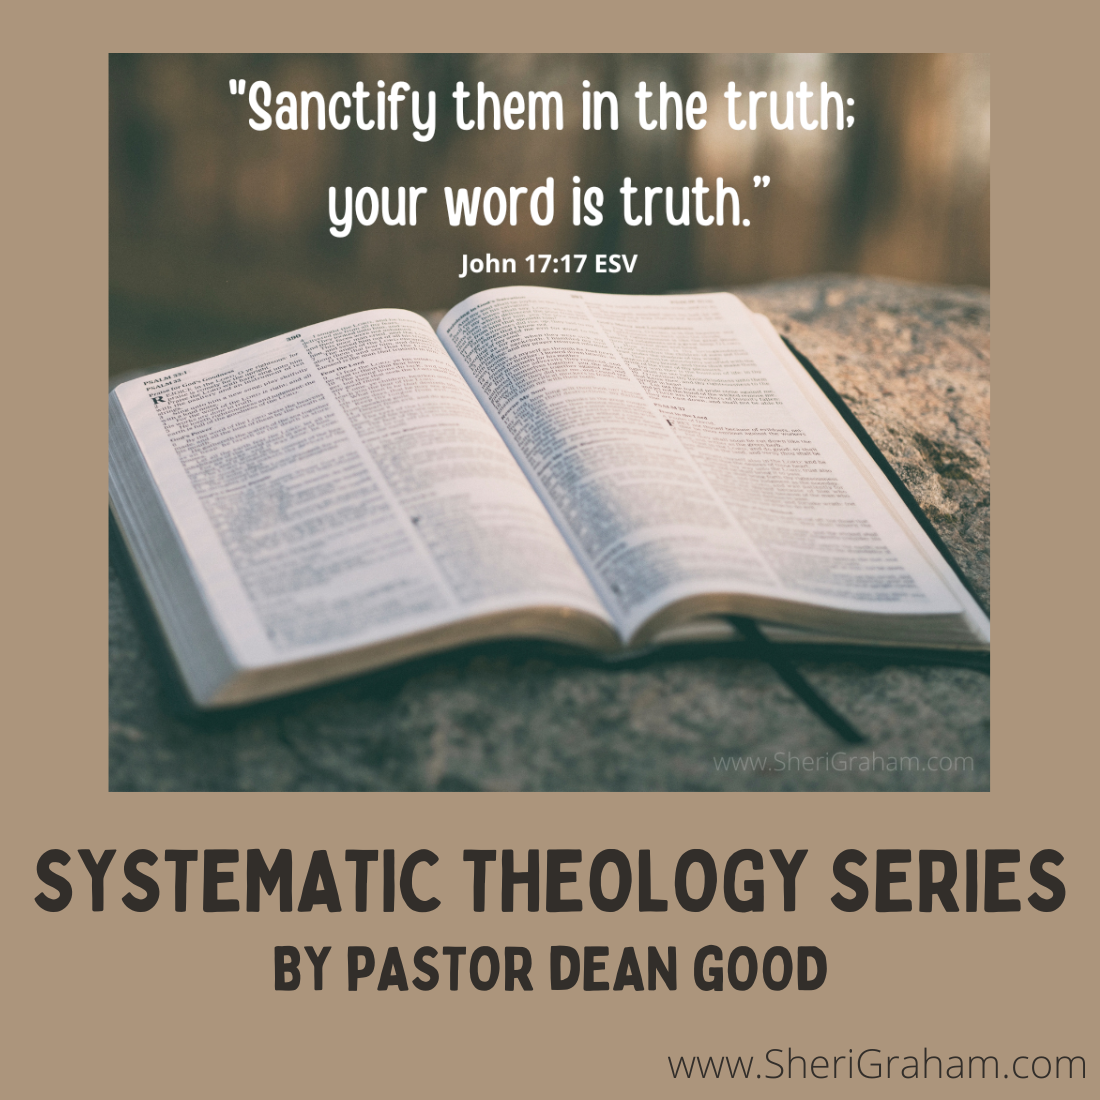 Systematic Theology Series by Pastor Dean Good